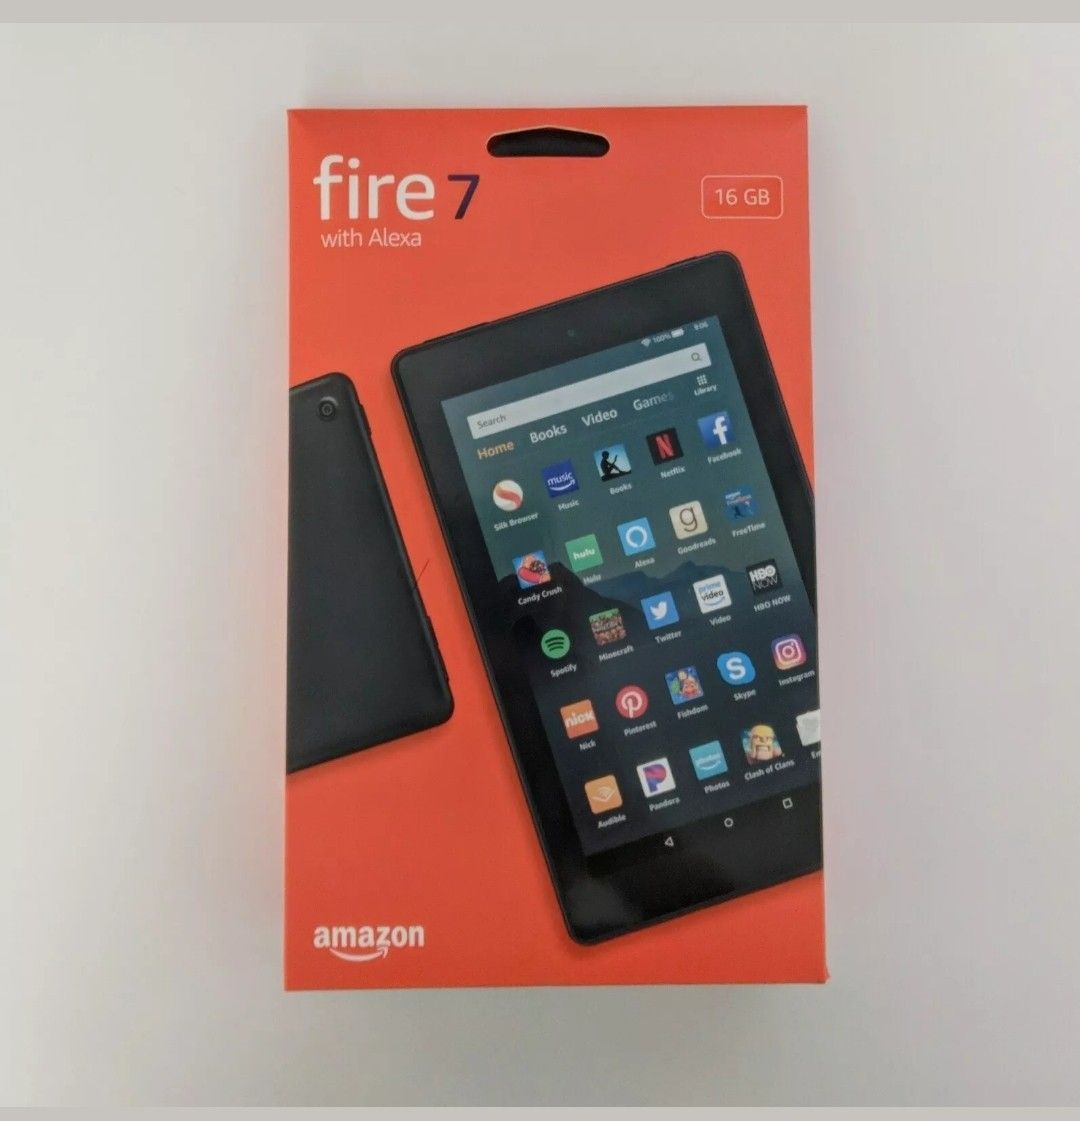 All-New Amazon Fire 7 Tablet (7" display, 16 GB, 9th generation) - Black (opened box) never used